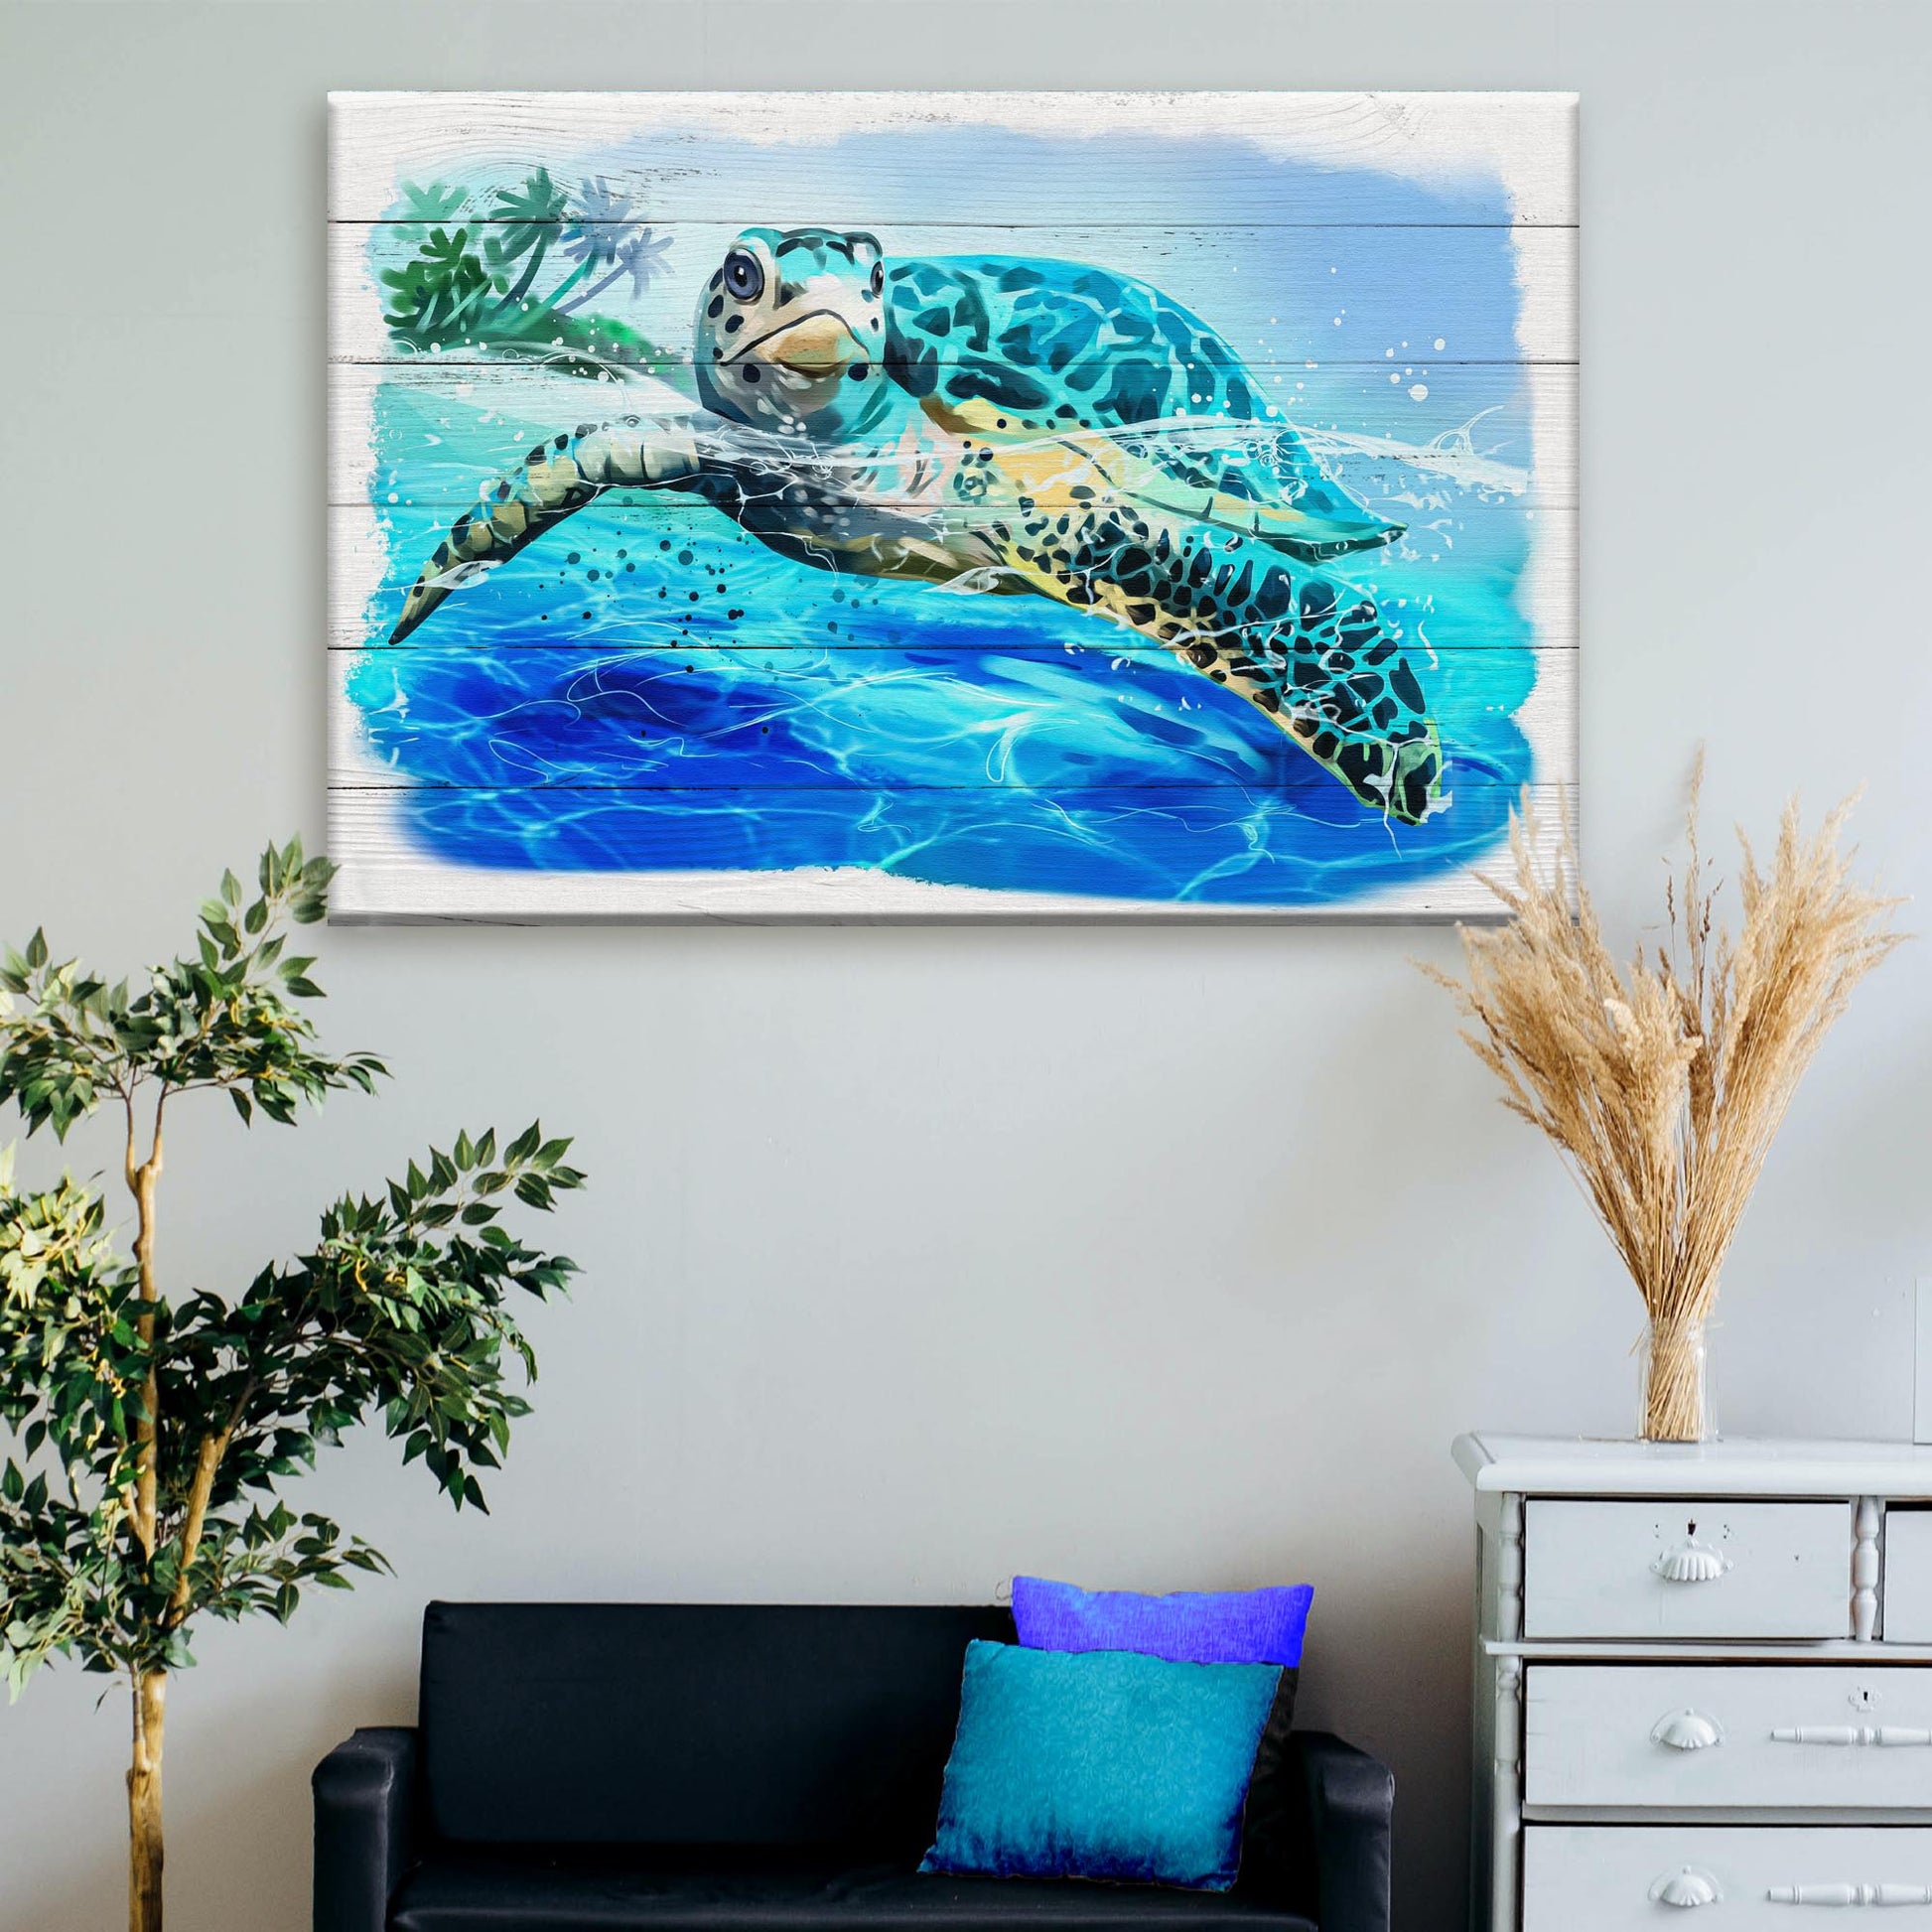 Turtle Oasis Watercolor Canvas Wall Art - Image by Tailored Canvases